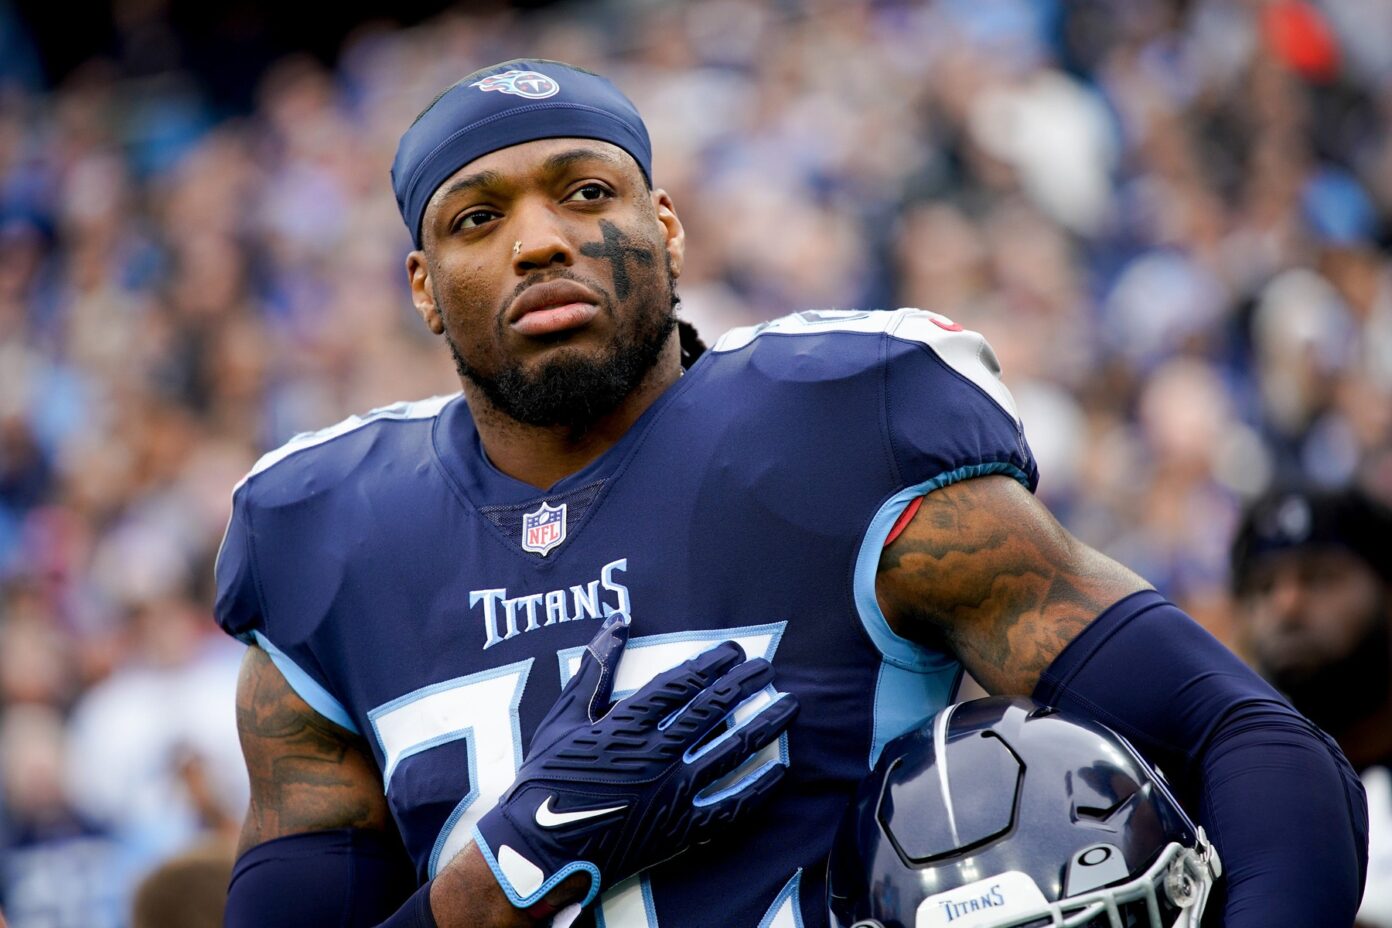 Derrick Henry Trade Rumors Could Titans RB Fit With the Dallas Cowboys?